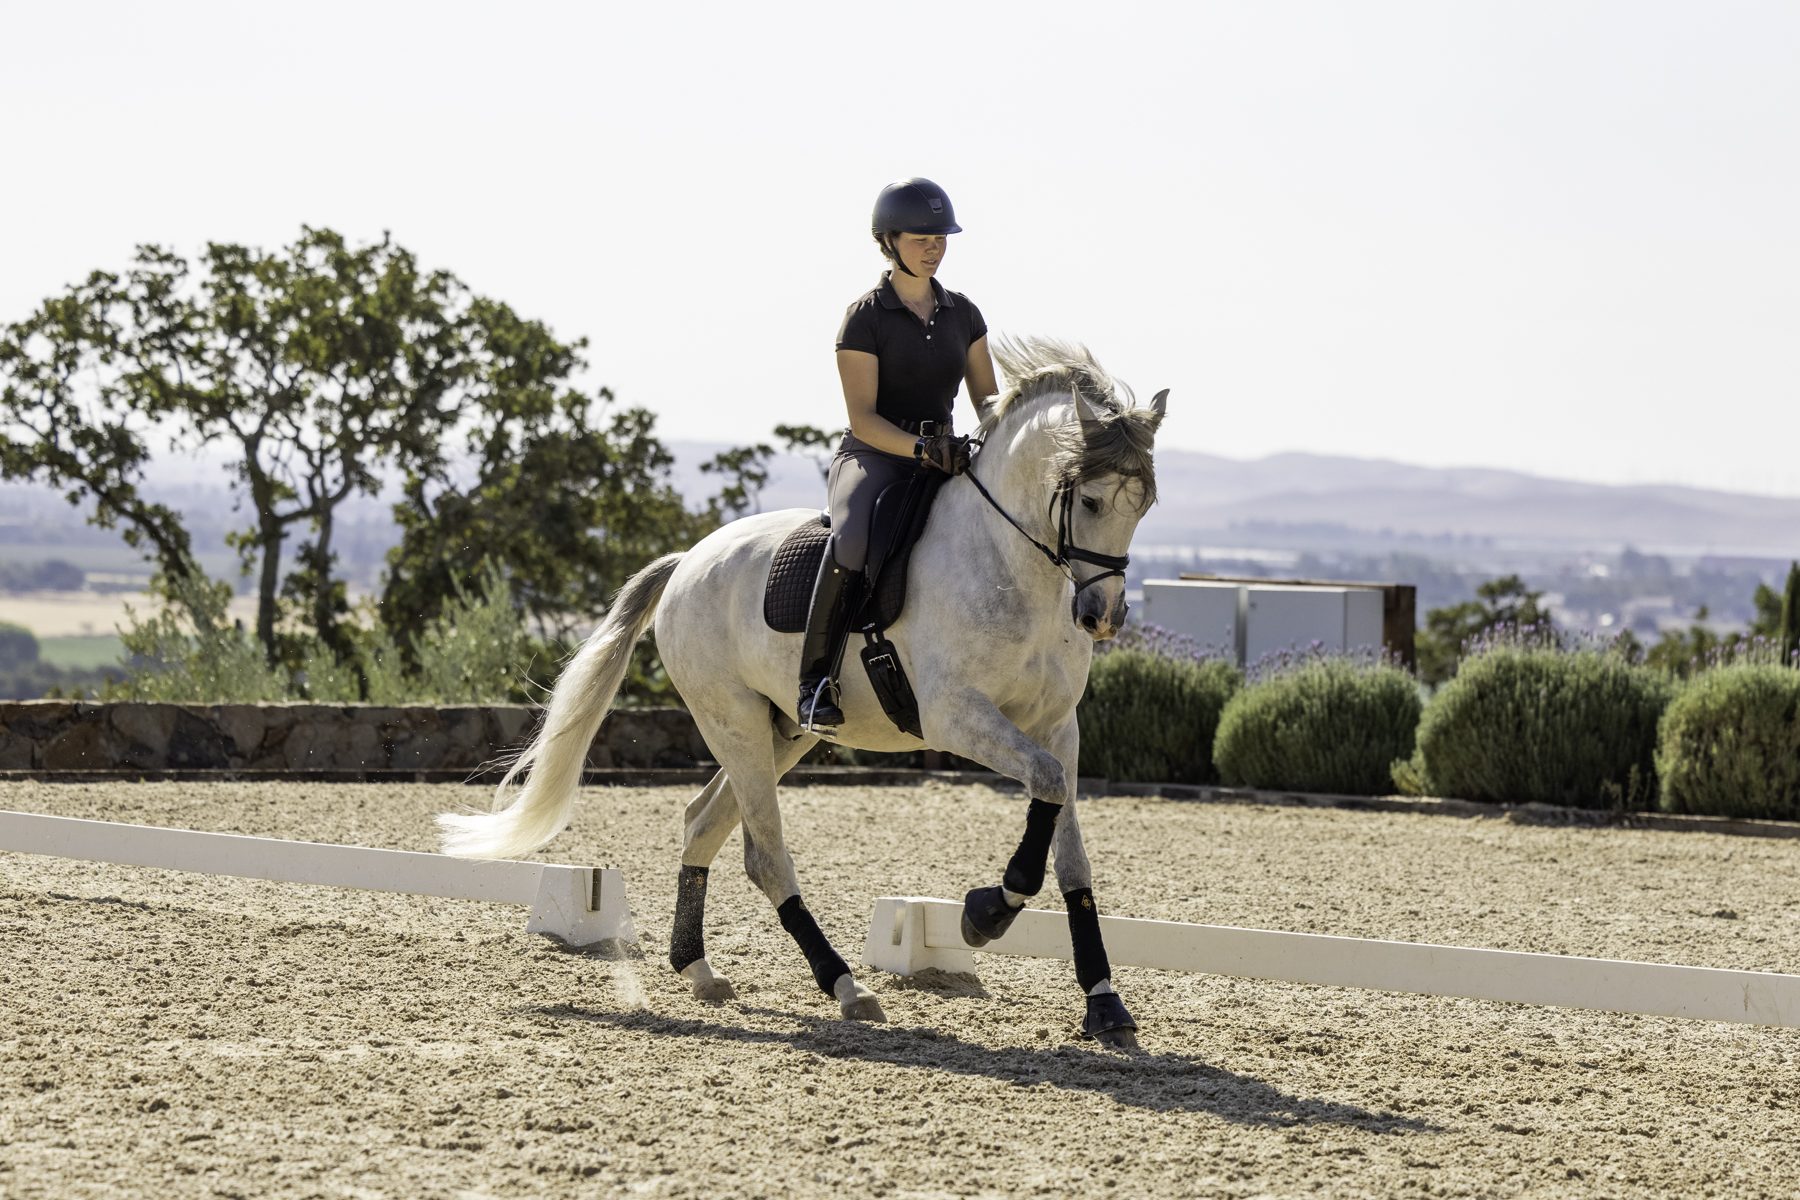 grey horse cantering with rider